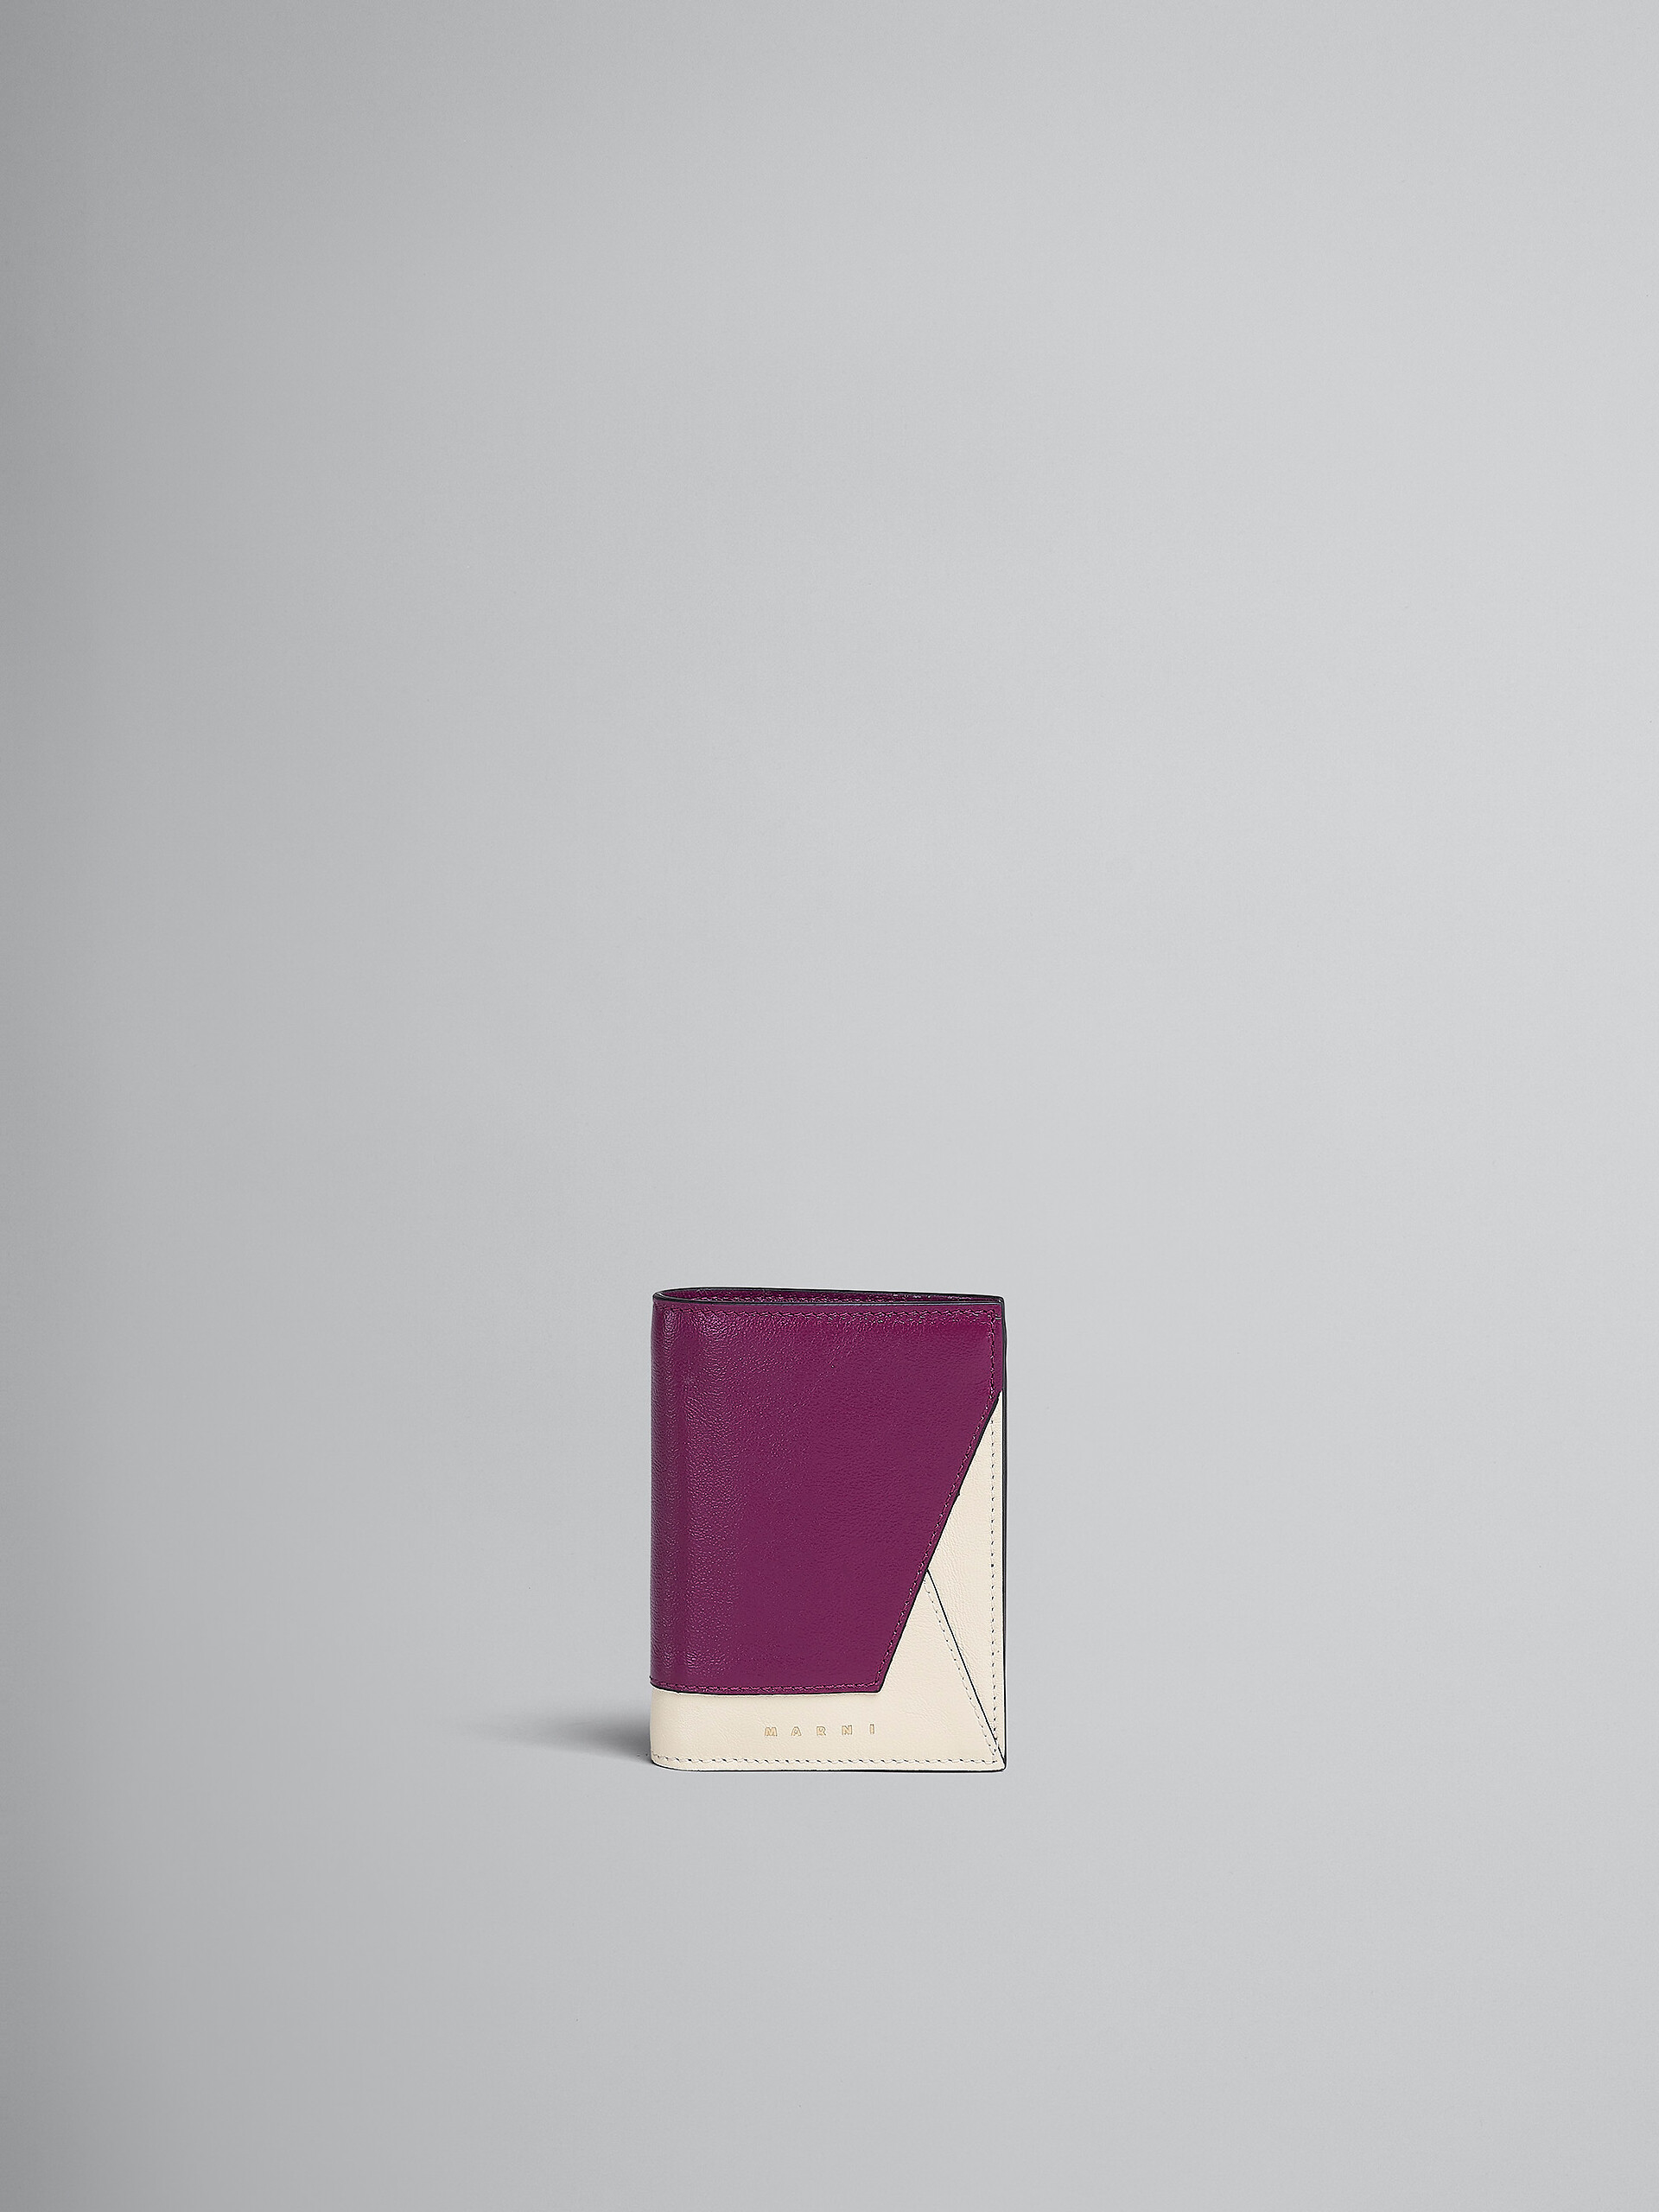 Purple and white leather bi-fold wallet - Wallets - Image 1